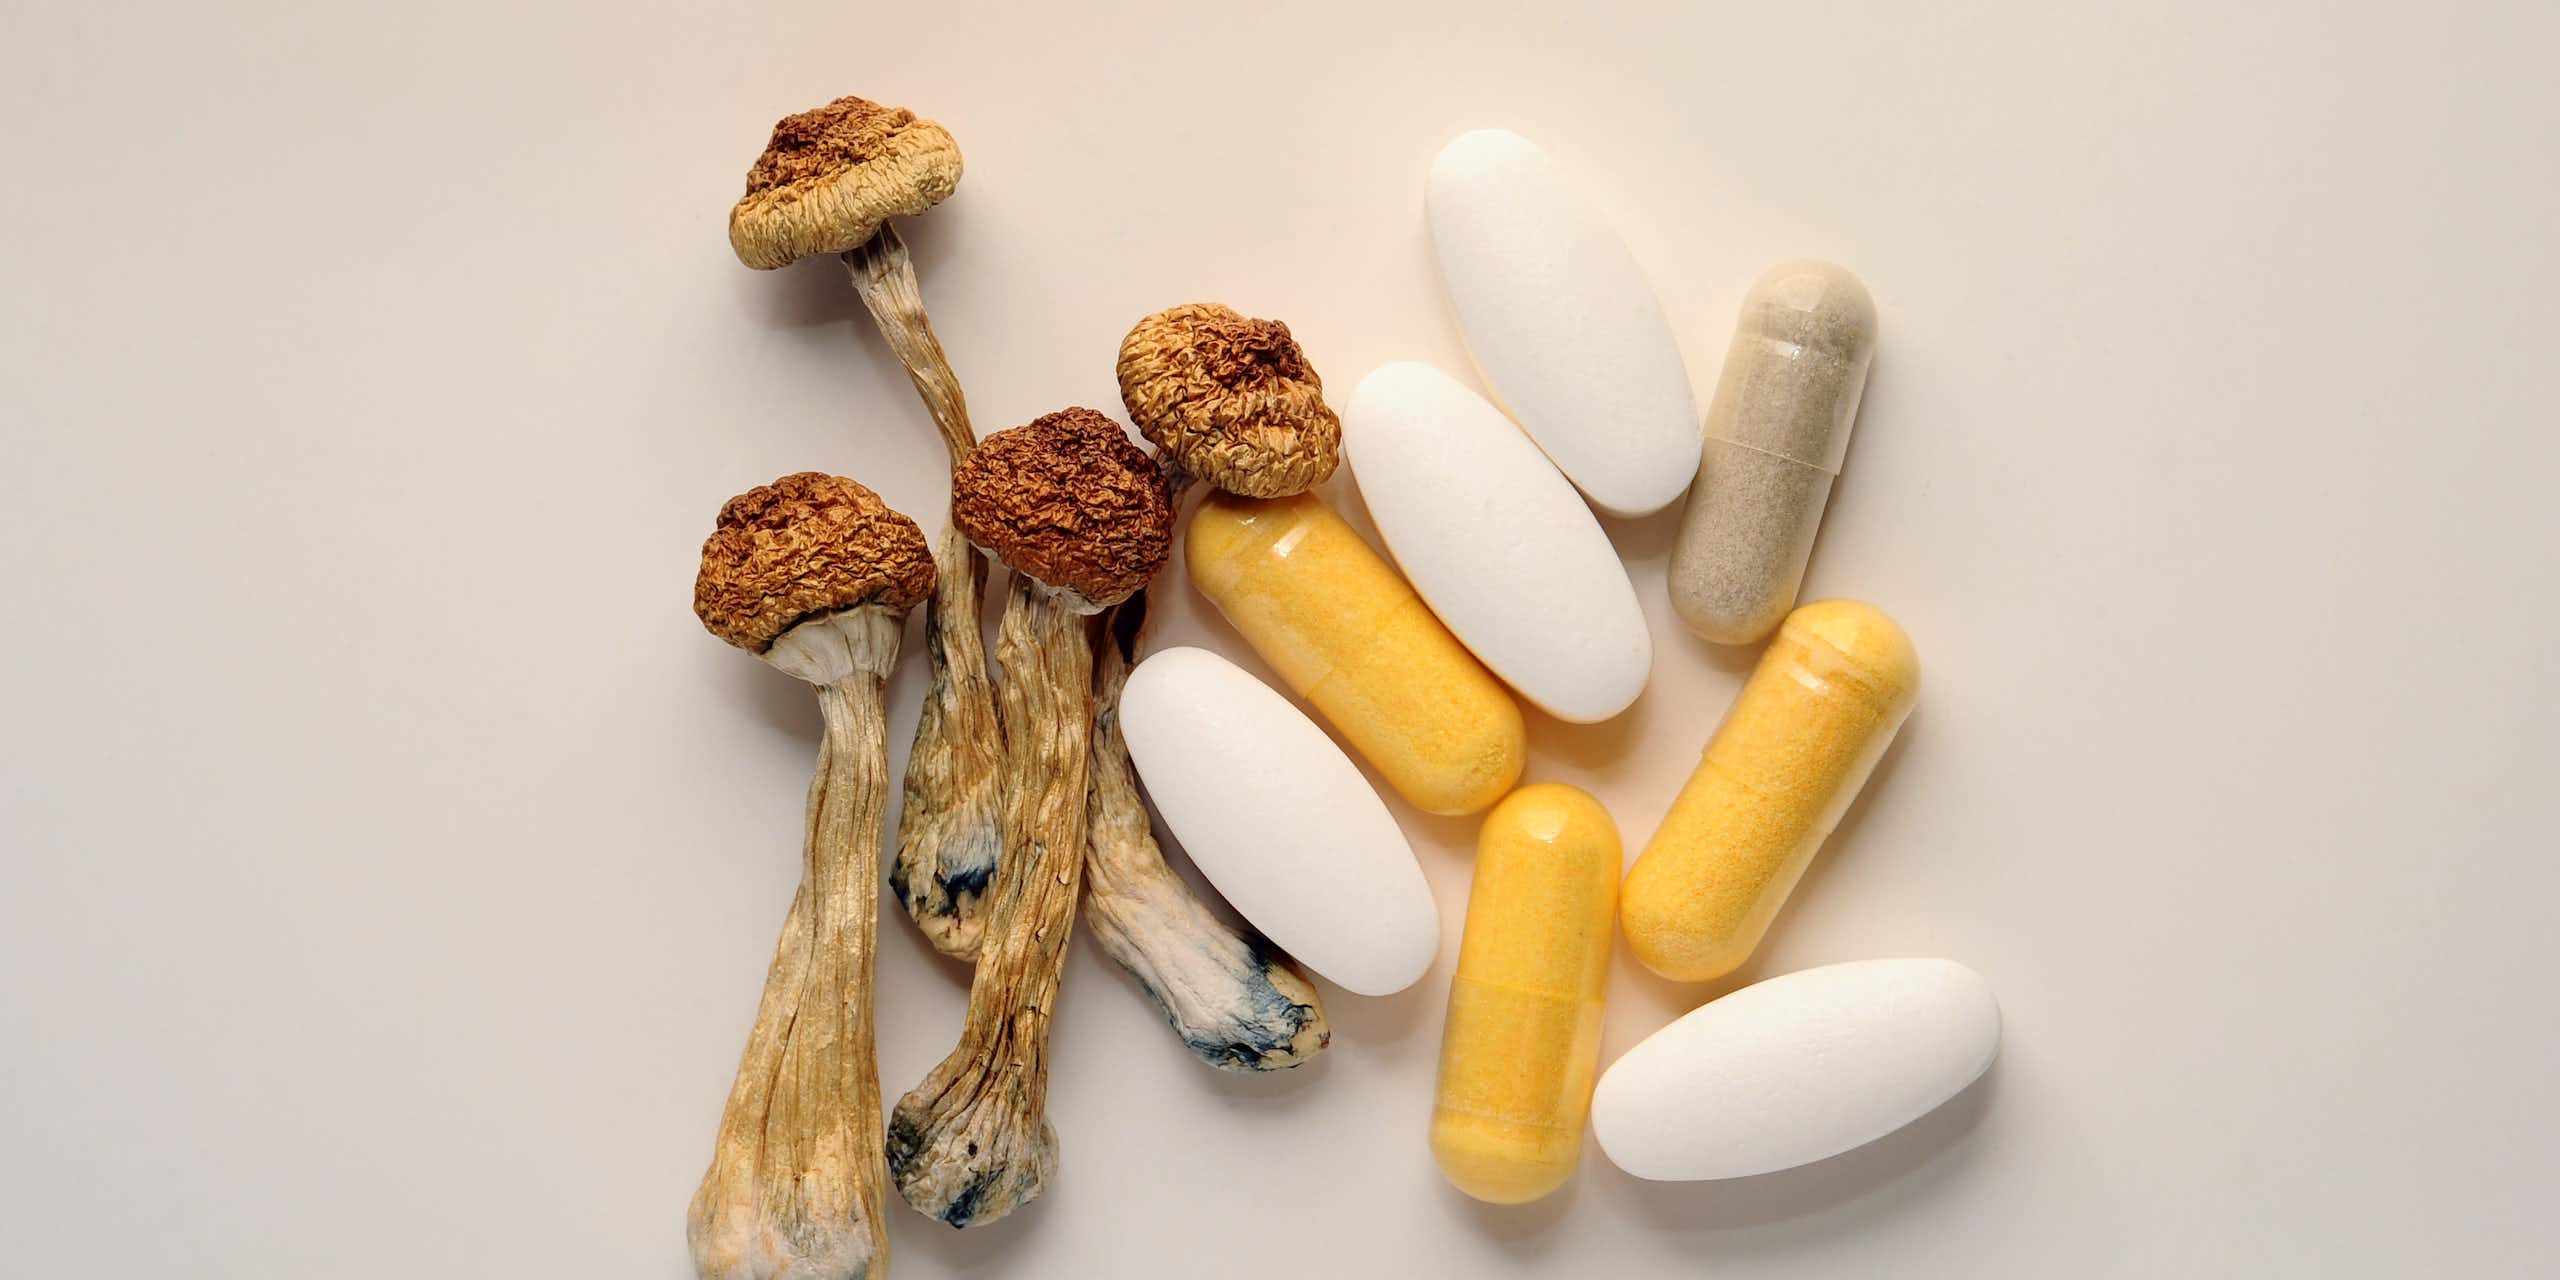 Dried psychedelic mushrooms and medication capsules